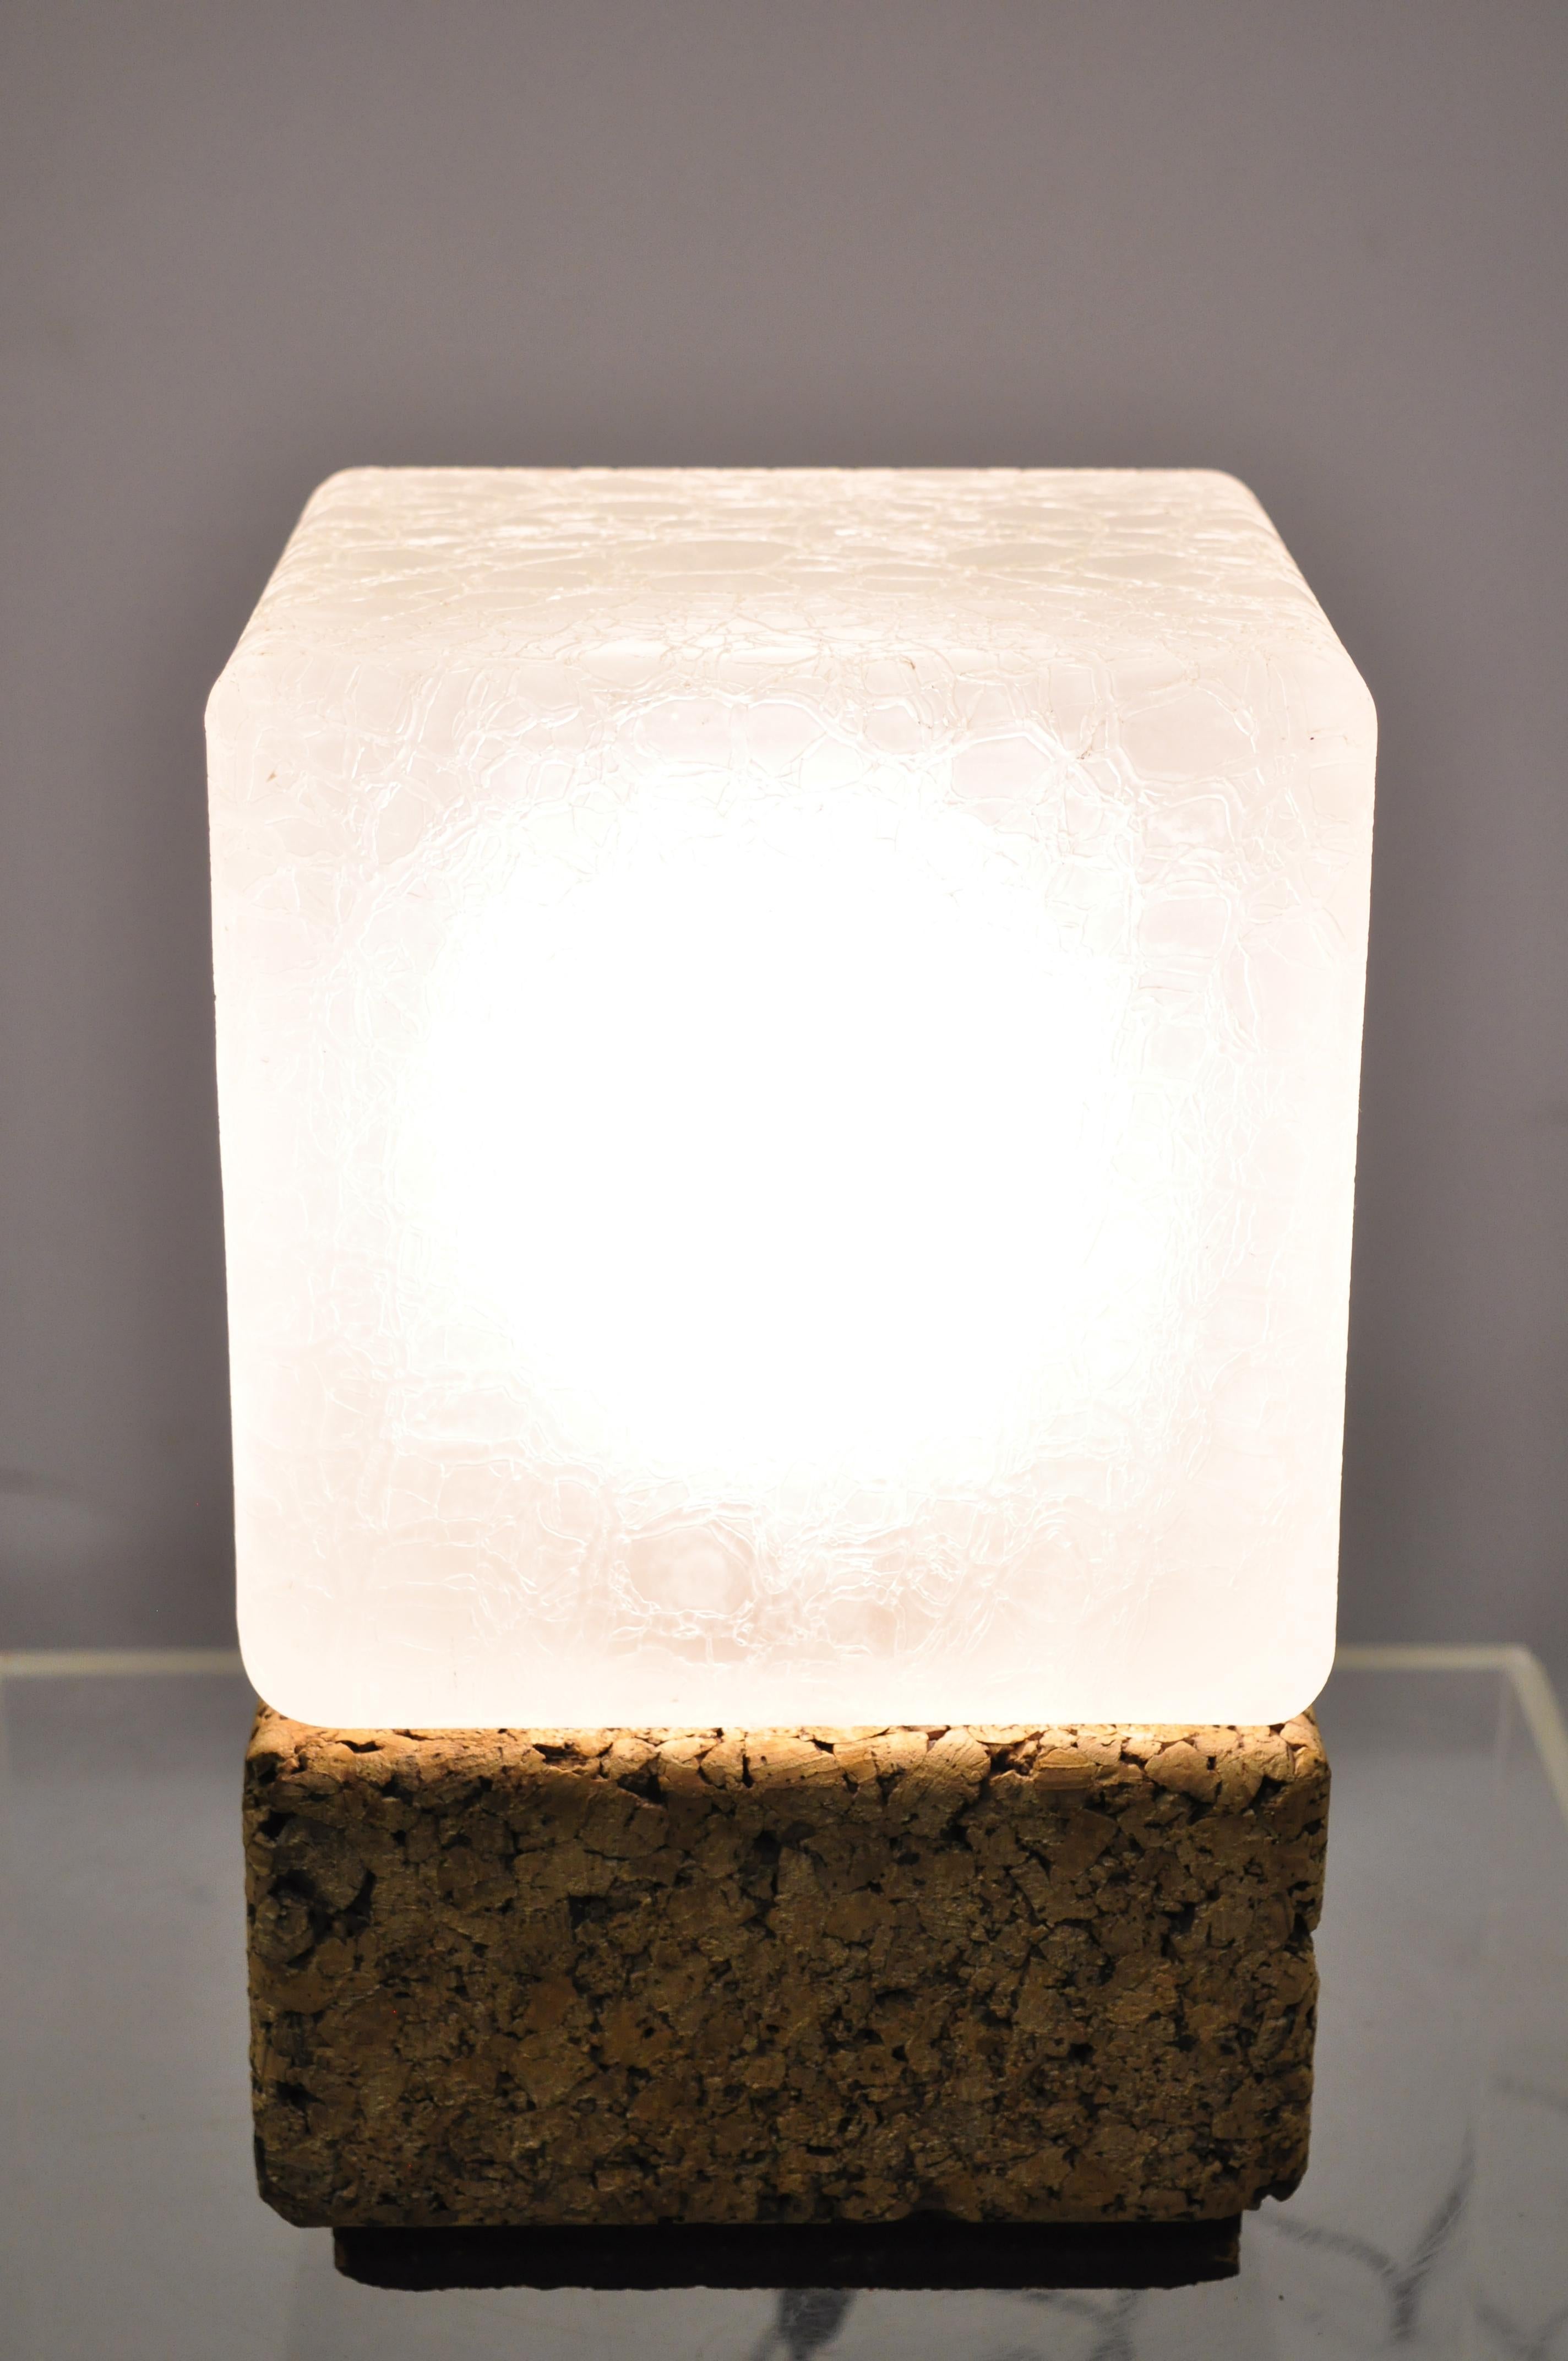 Vintage Mid-Century Modern cork crackled glass ice cube table lamp, circa mid-20th century.
Measurements: 13